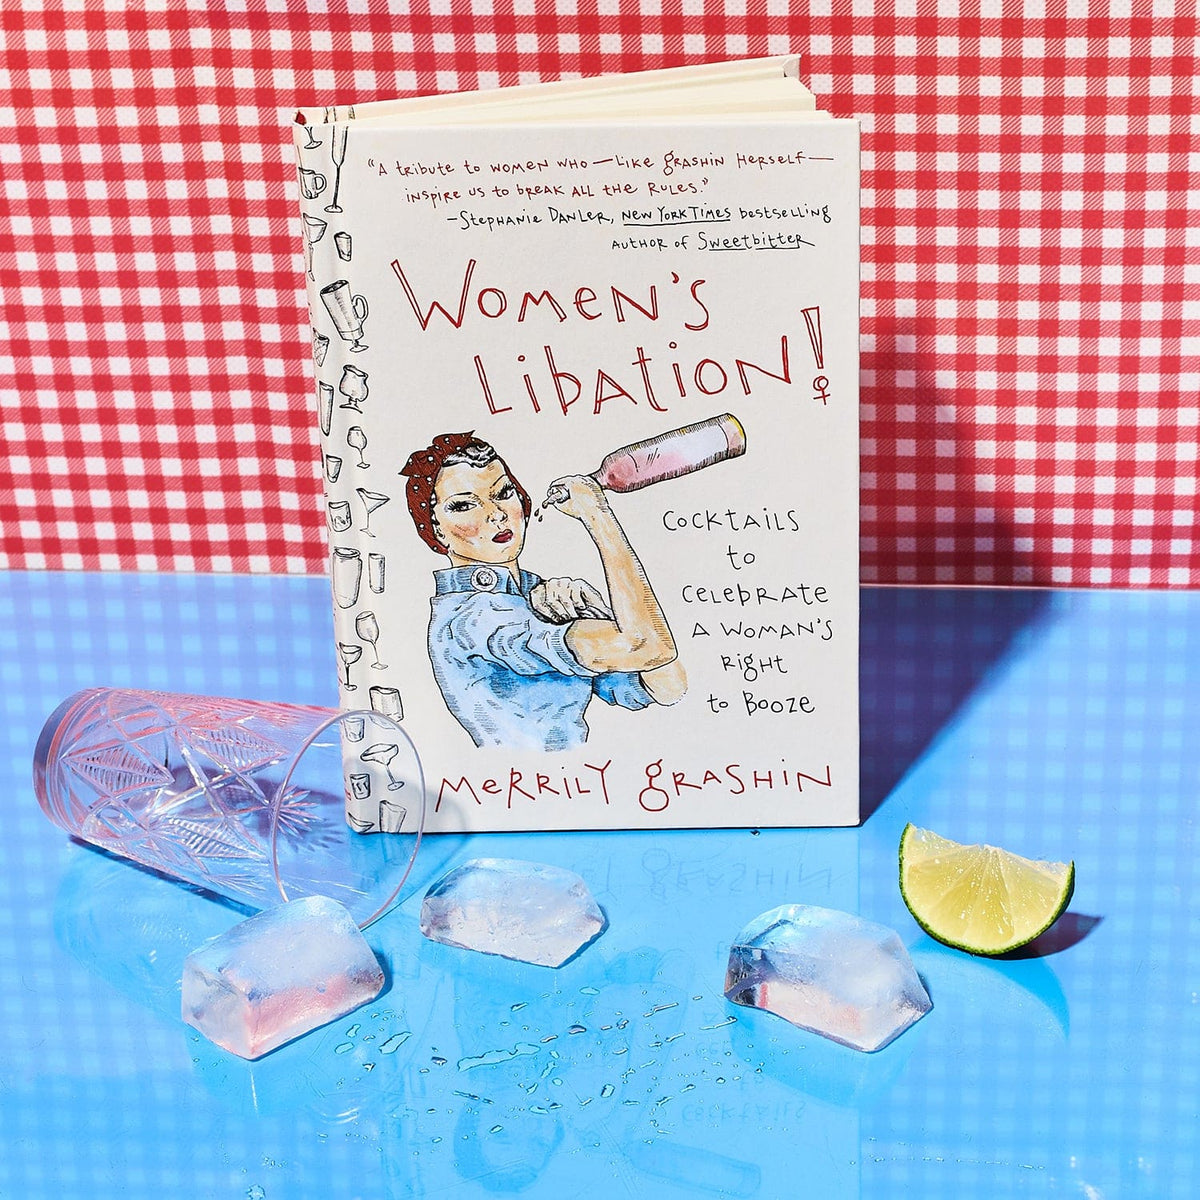 Women’s Libation! Cocktails To Celebrate a Woman’s Right